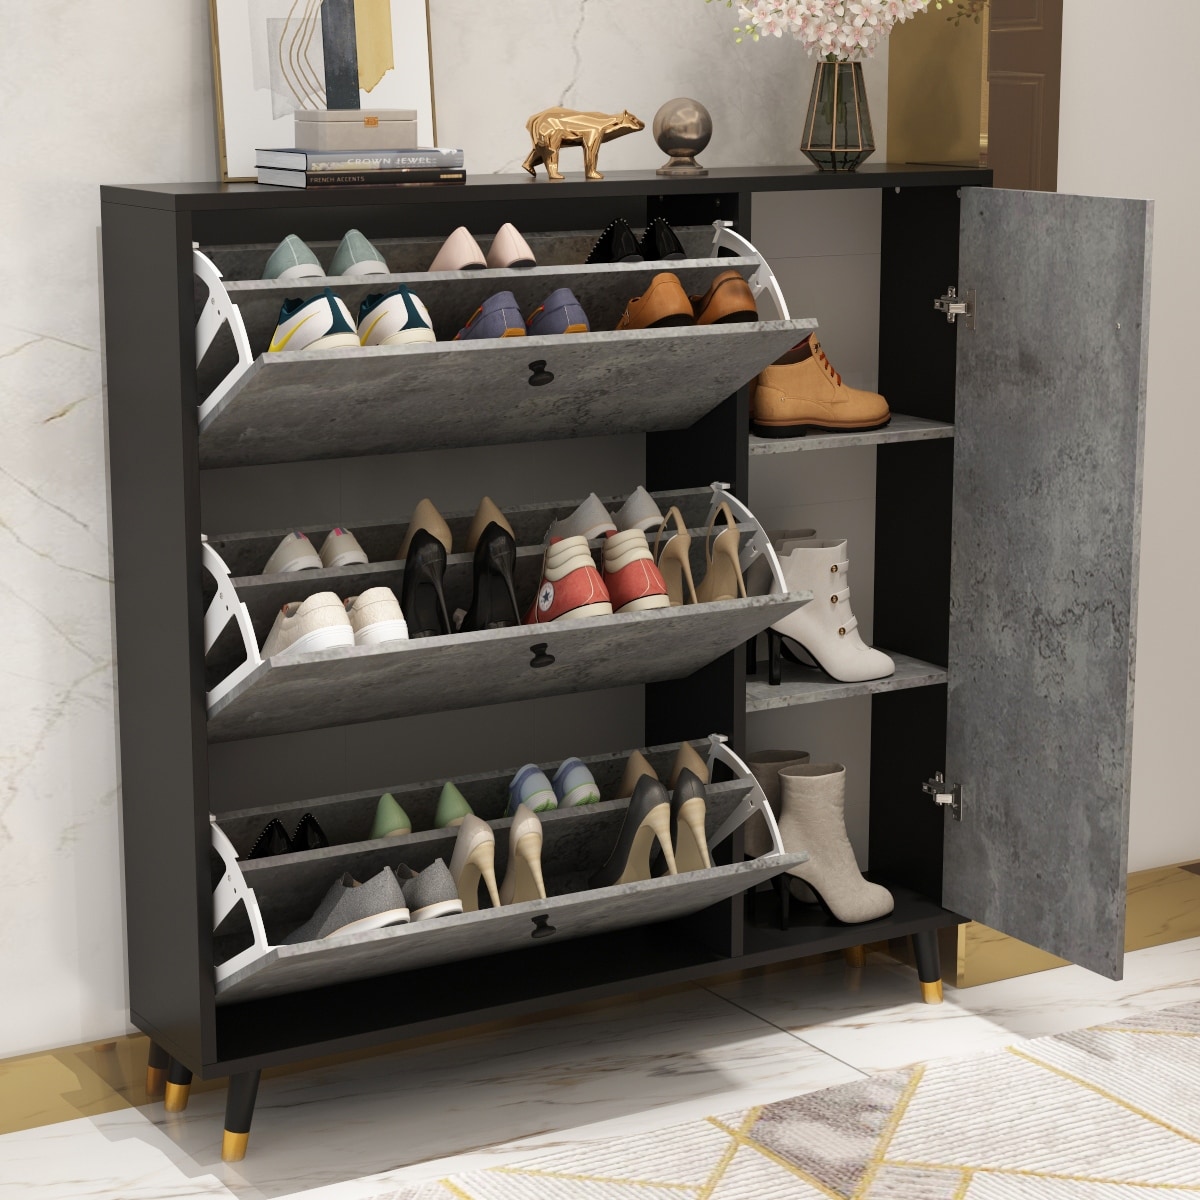 https://ak1.ostkcdn.com/images/products/is/images/direct/af7405d27a830b81dc4391ce7d5ef1a5bec16668/47.2%22H-Shoe-Cabinet-Shoe-Rack-Flip-Down-Entryway-Storage.jpg